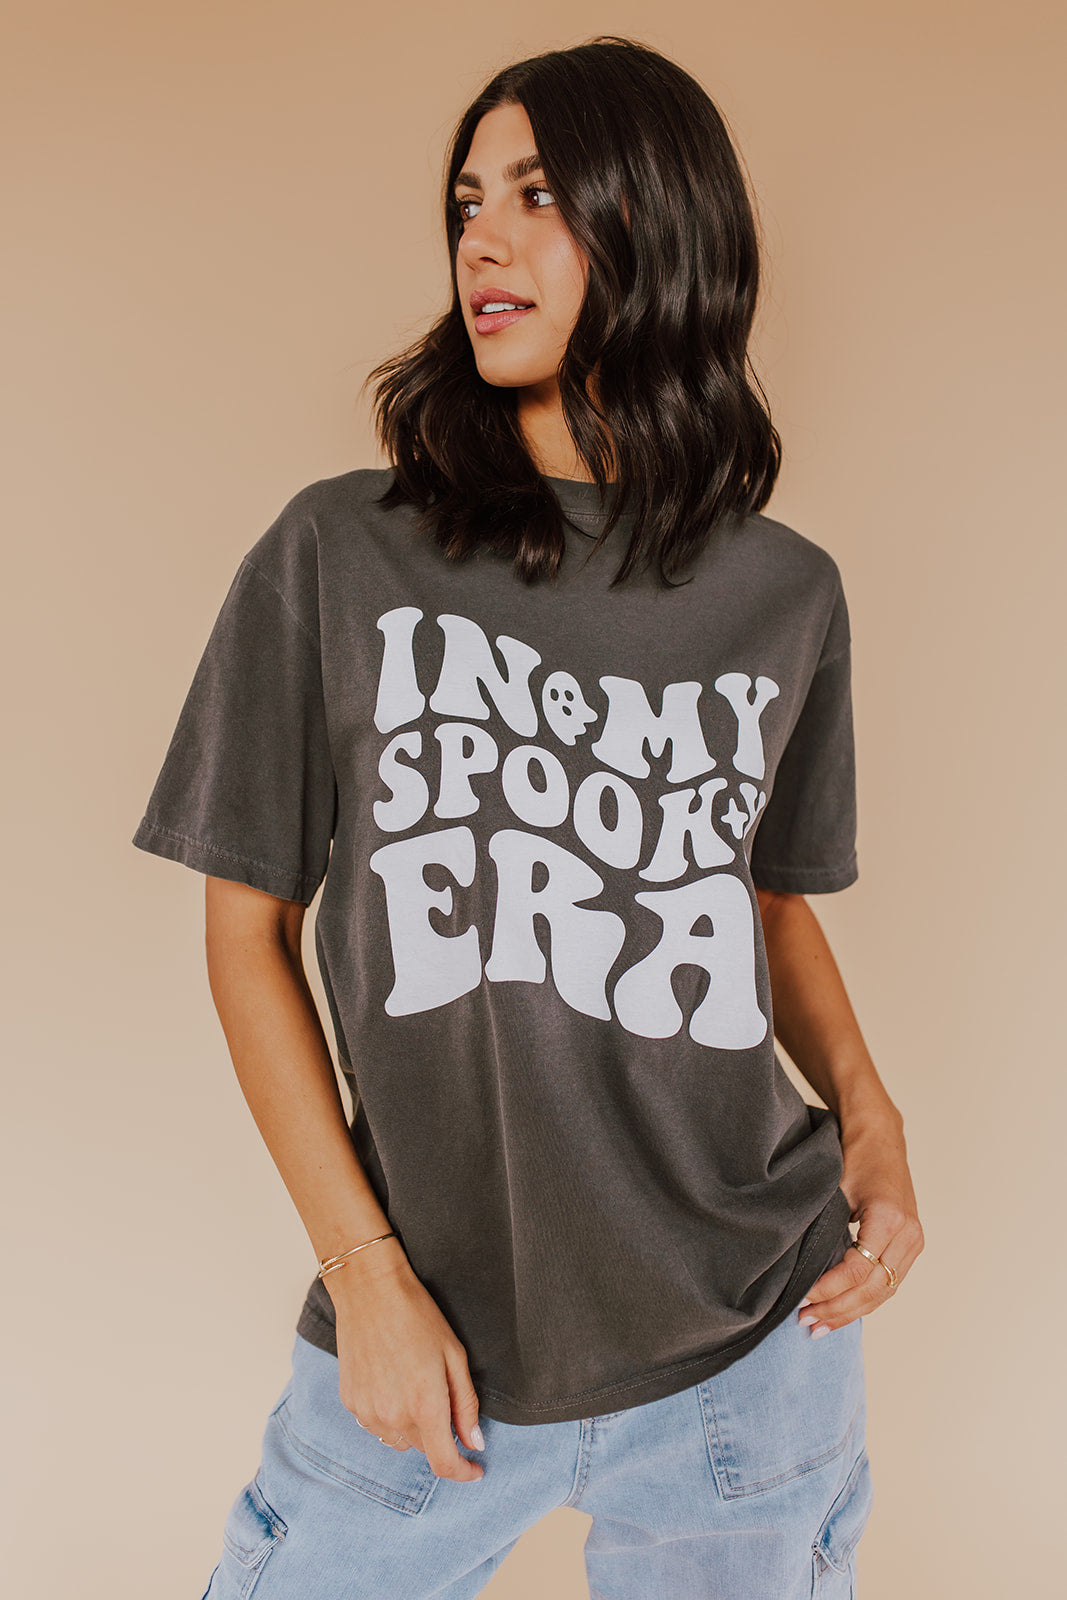 cute graphic tees for halloween | PINK DESERT